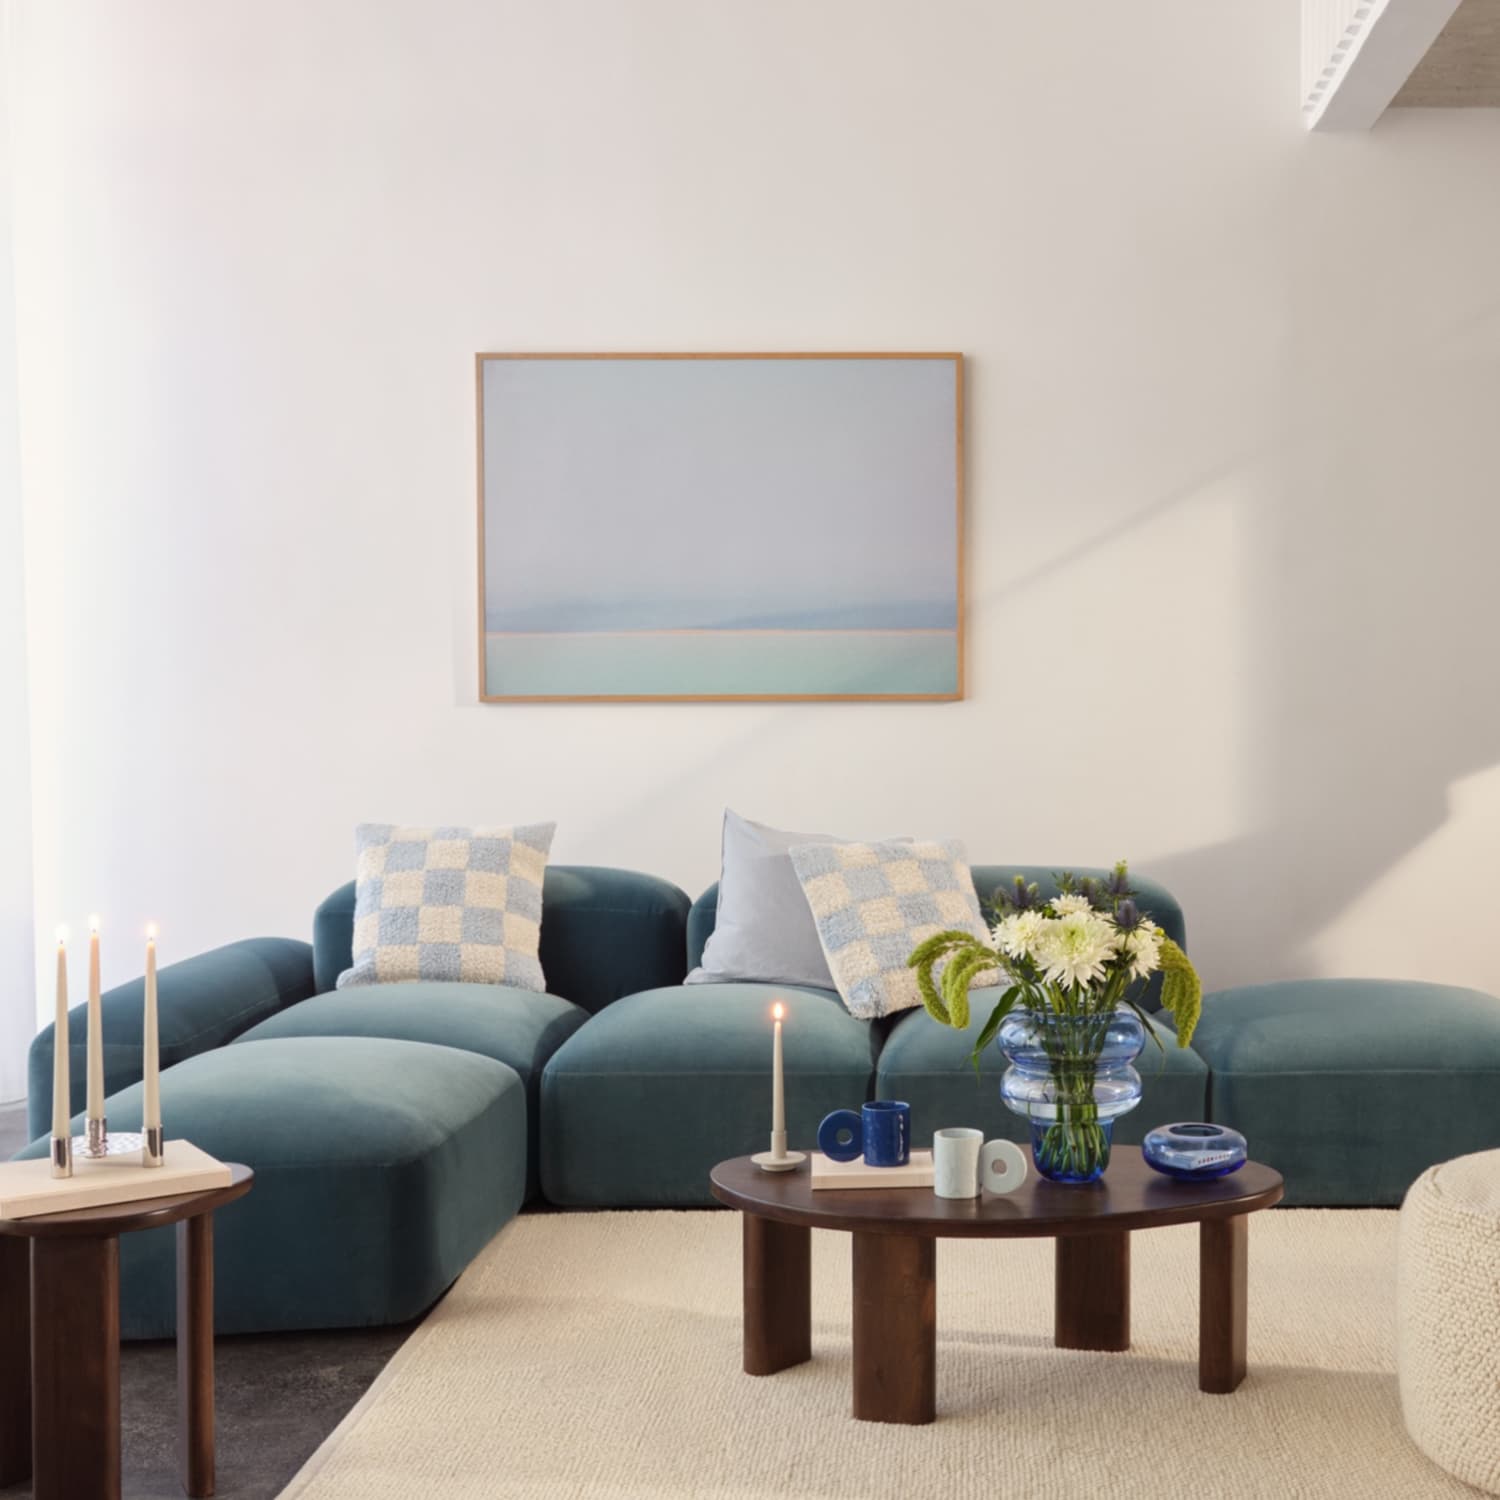 H&M Home's Spring Is Of Breezy Pops of Color Apartment Therapy